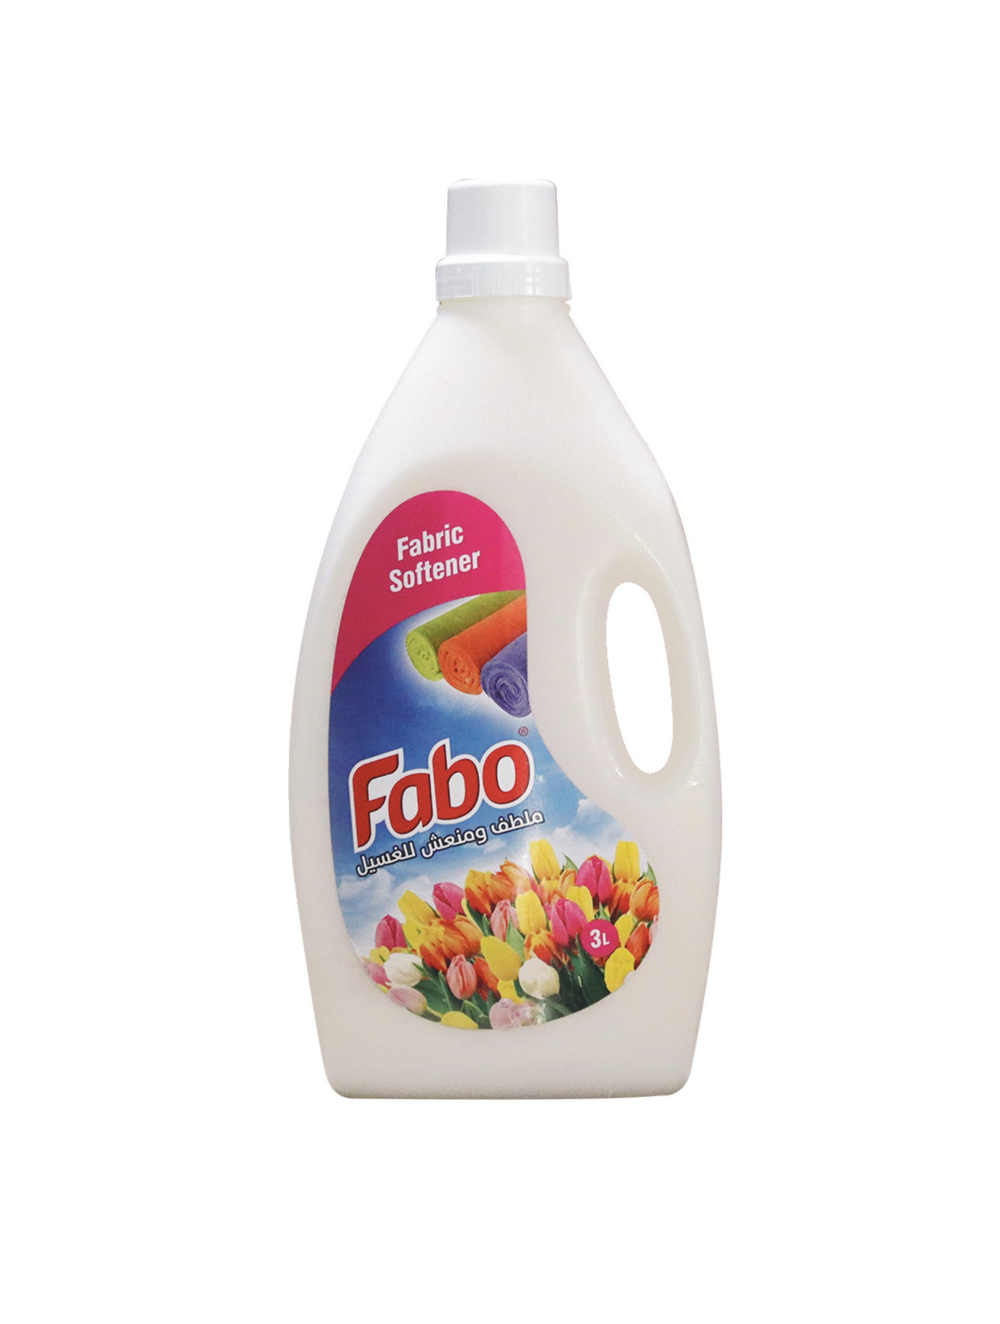 fabo-products_page-0118